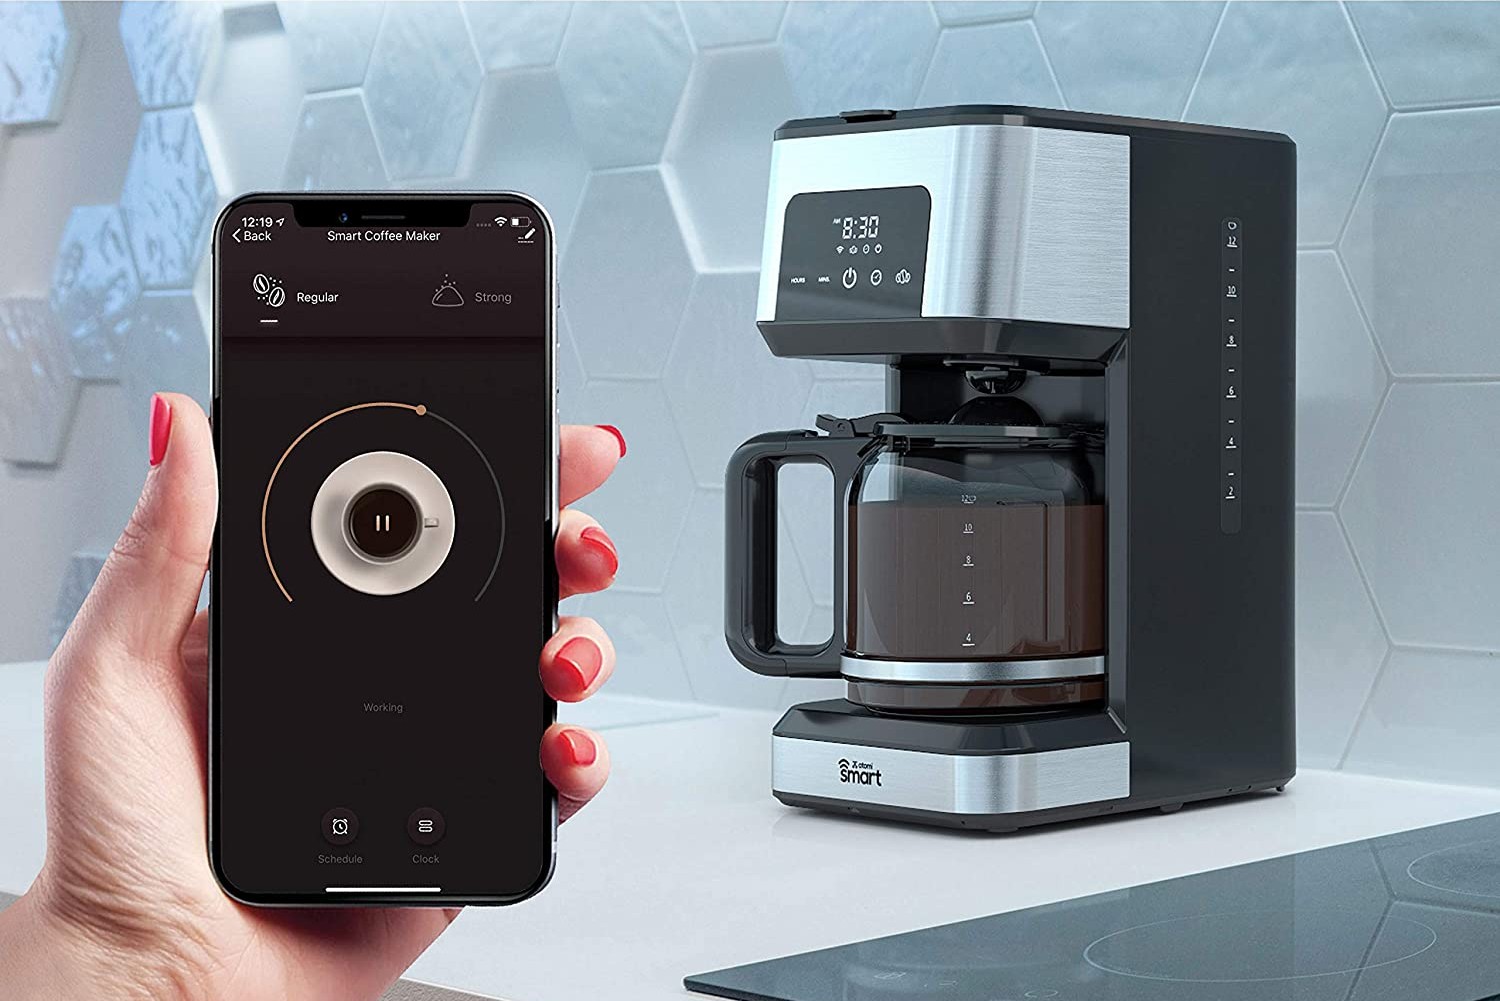 How to Use a Smart Coffee Maker